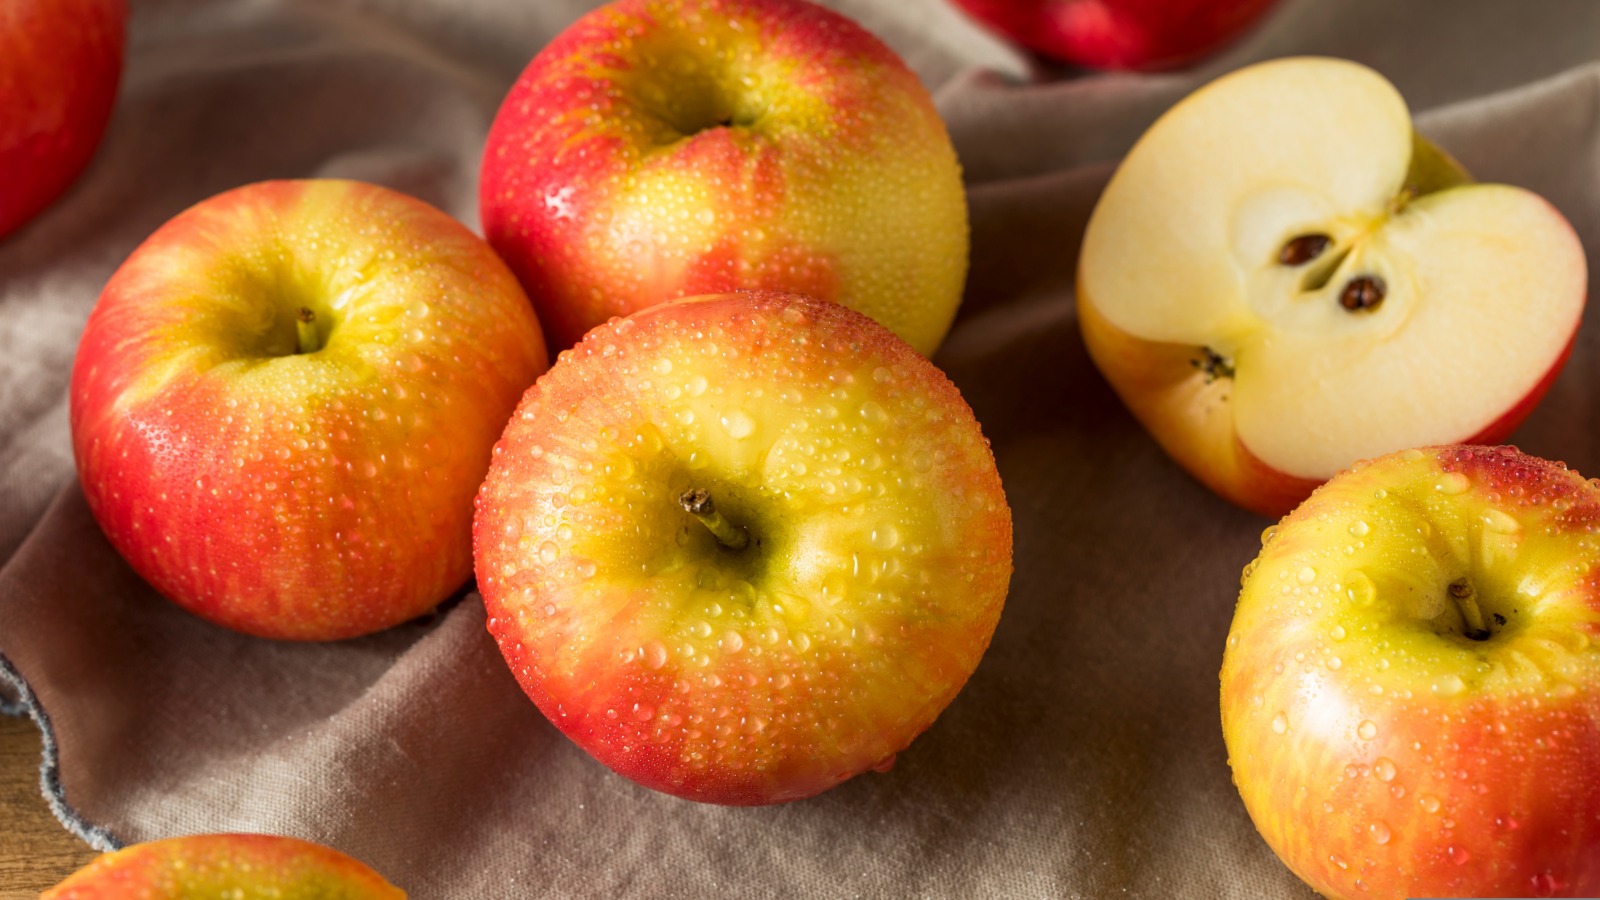 The Real Reason Honeycrisp Apples Are So Expensive